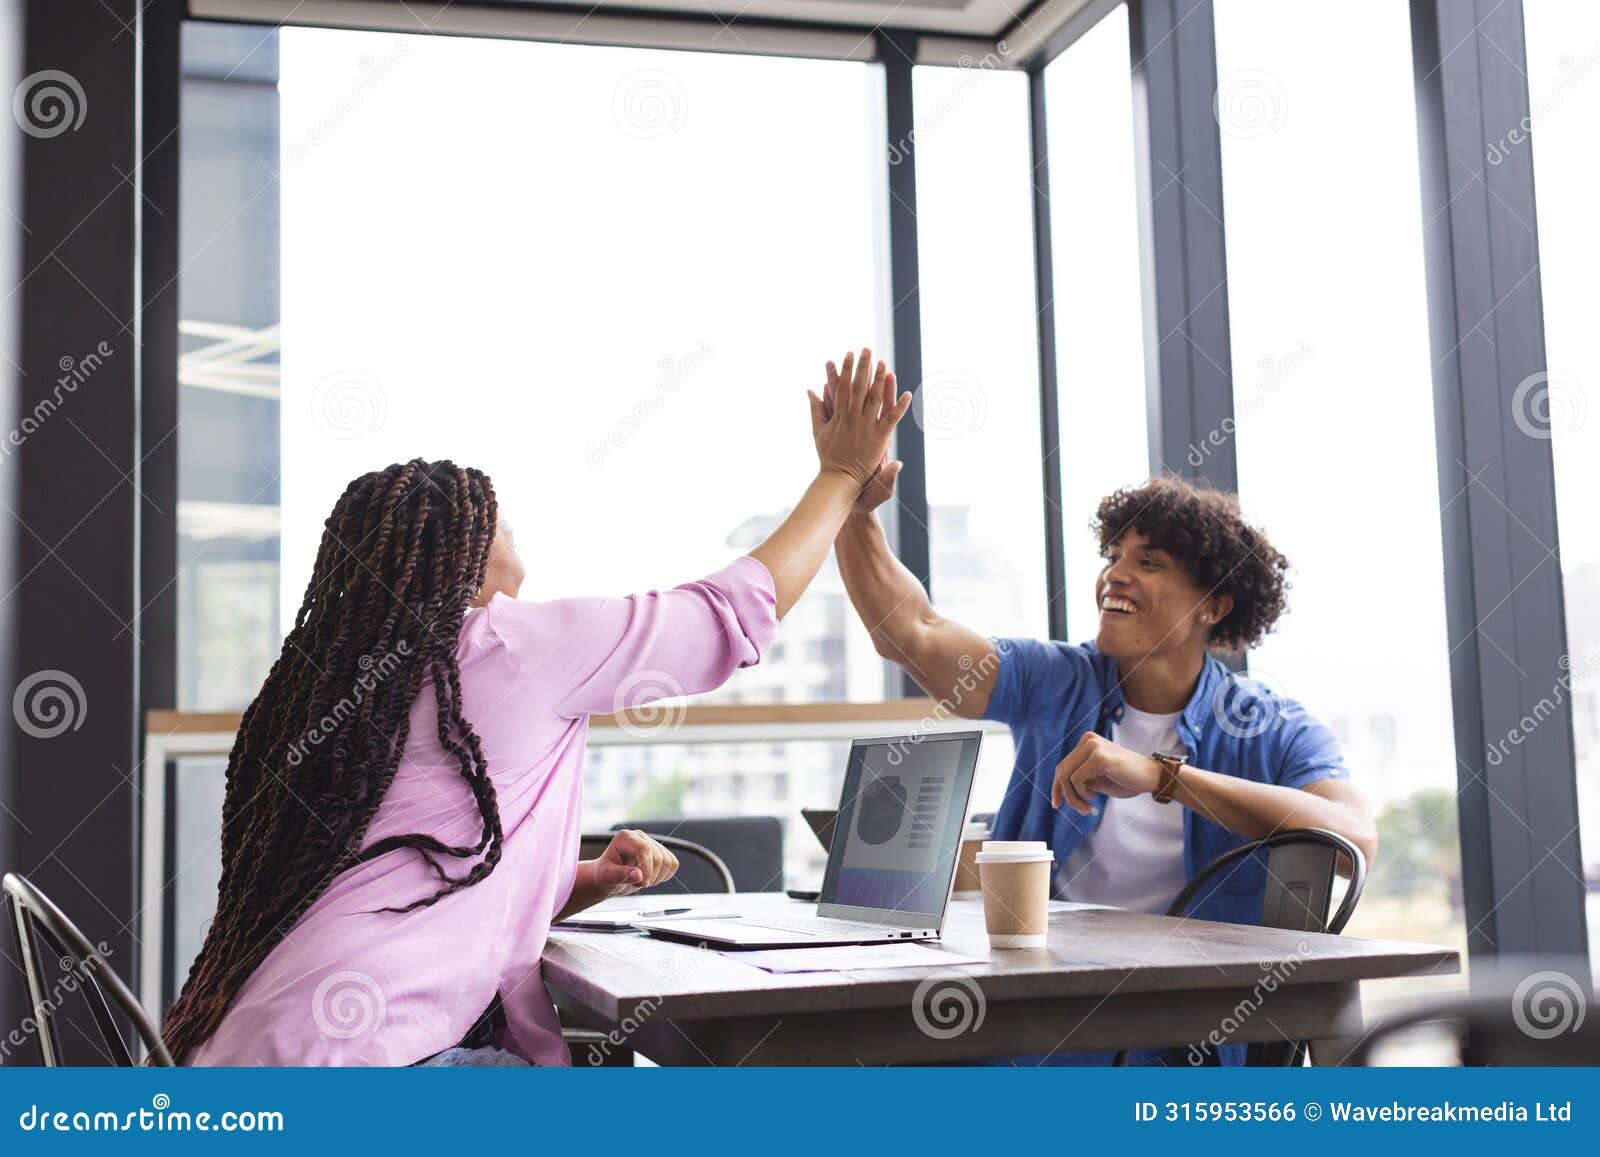 diverse colleagues high-fiving at table with a laptop in a modern business office